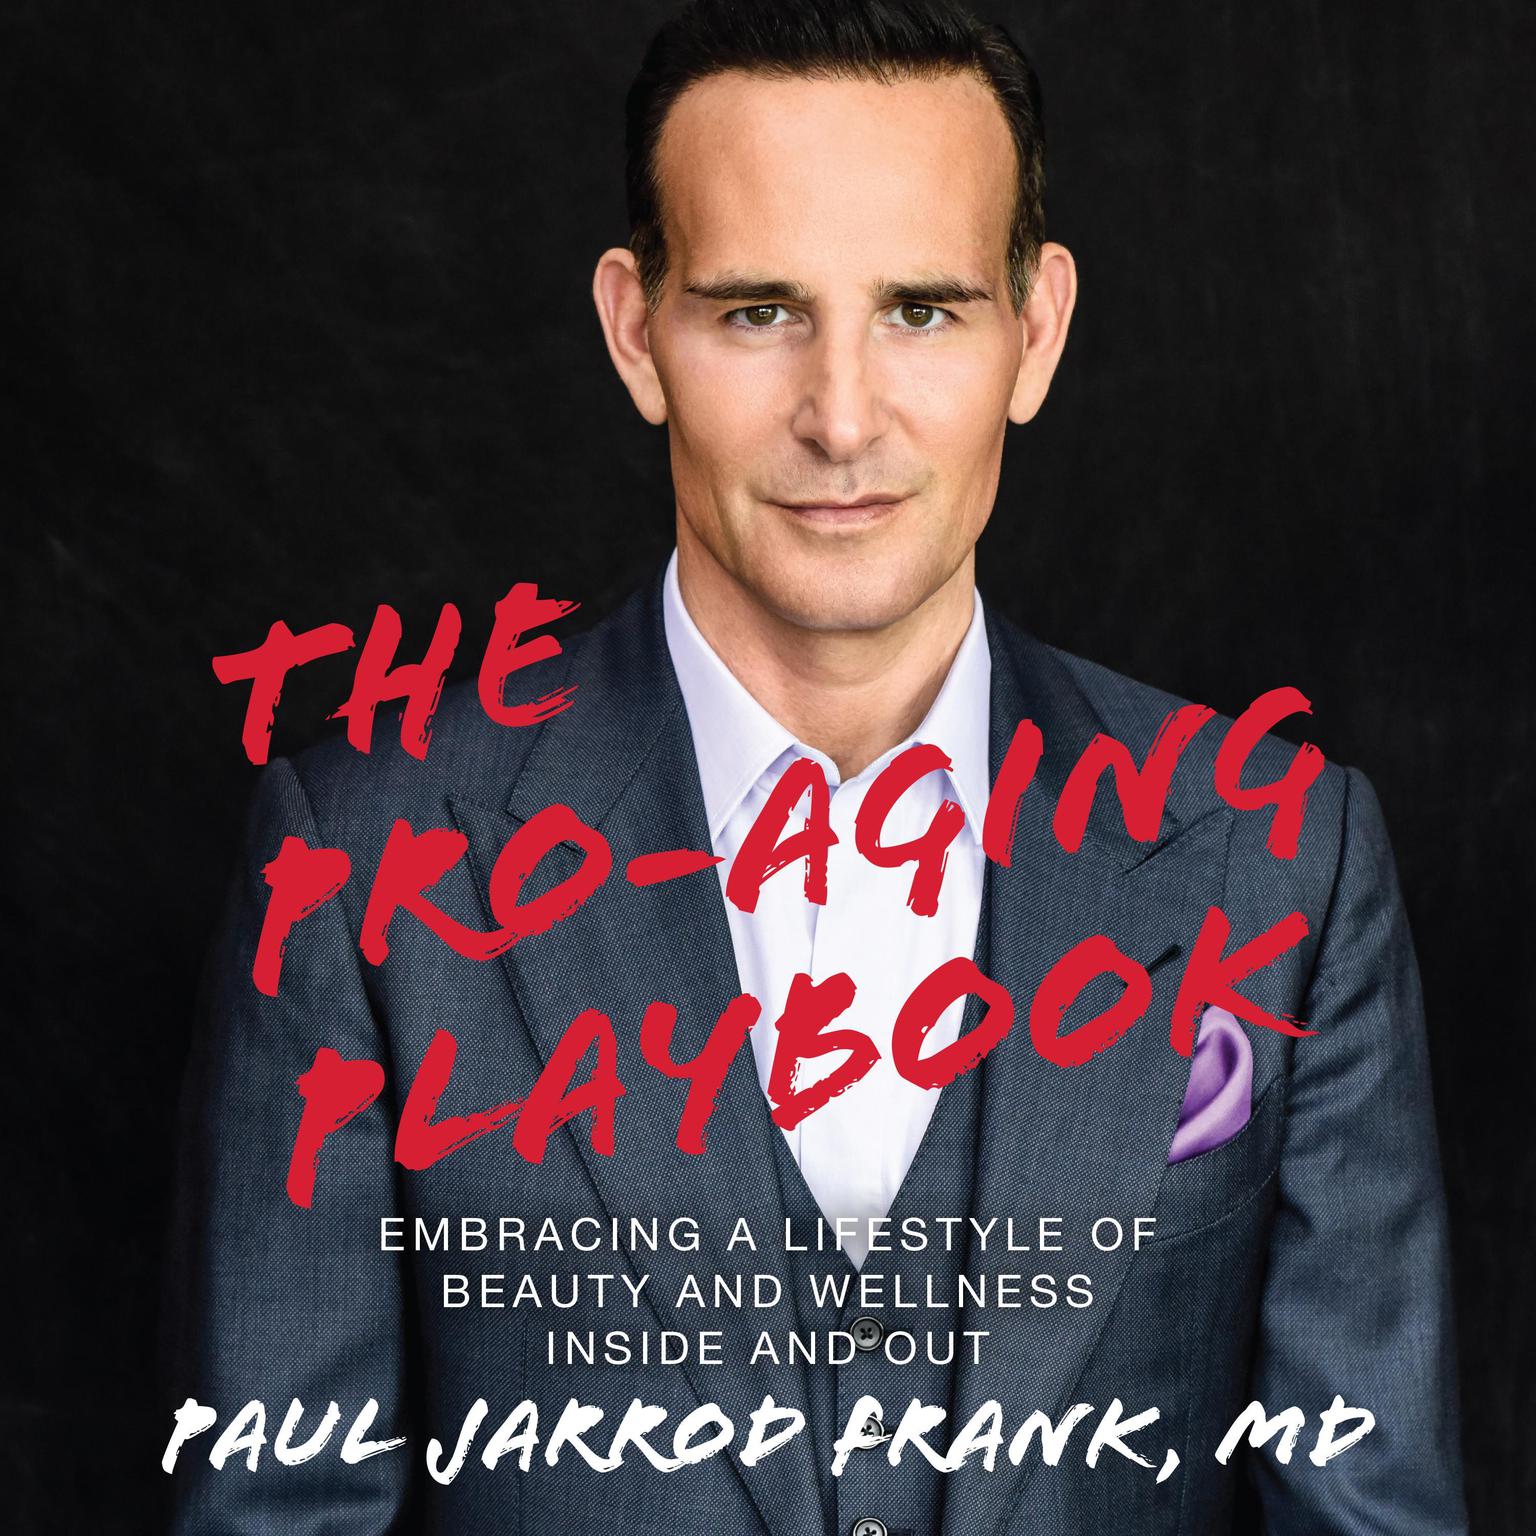 The Pro-Aging Playbook: Embracing a Lifestyle of Beauty and Wellness Inside and Out Audiobook, by Paul Jarrod Frank